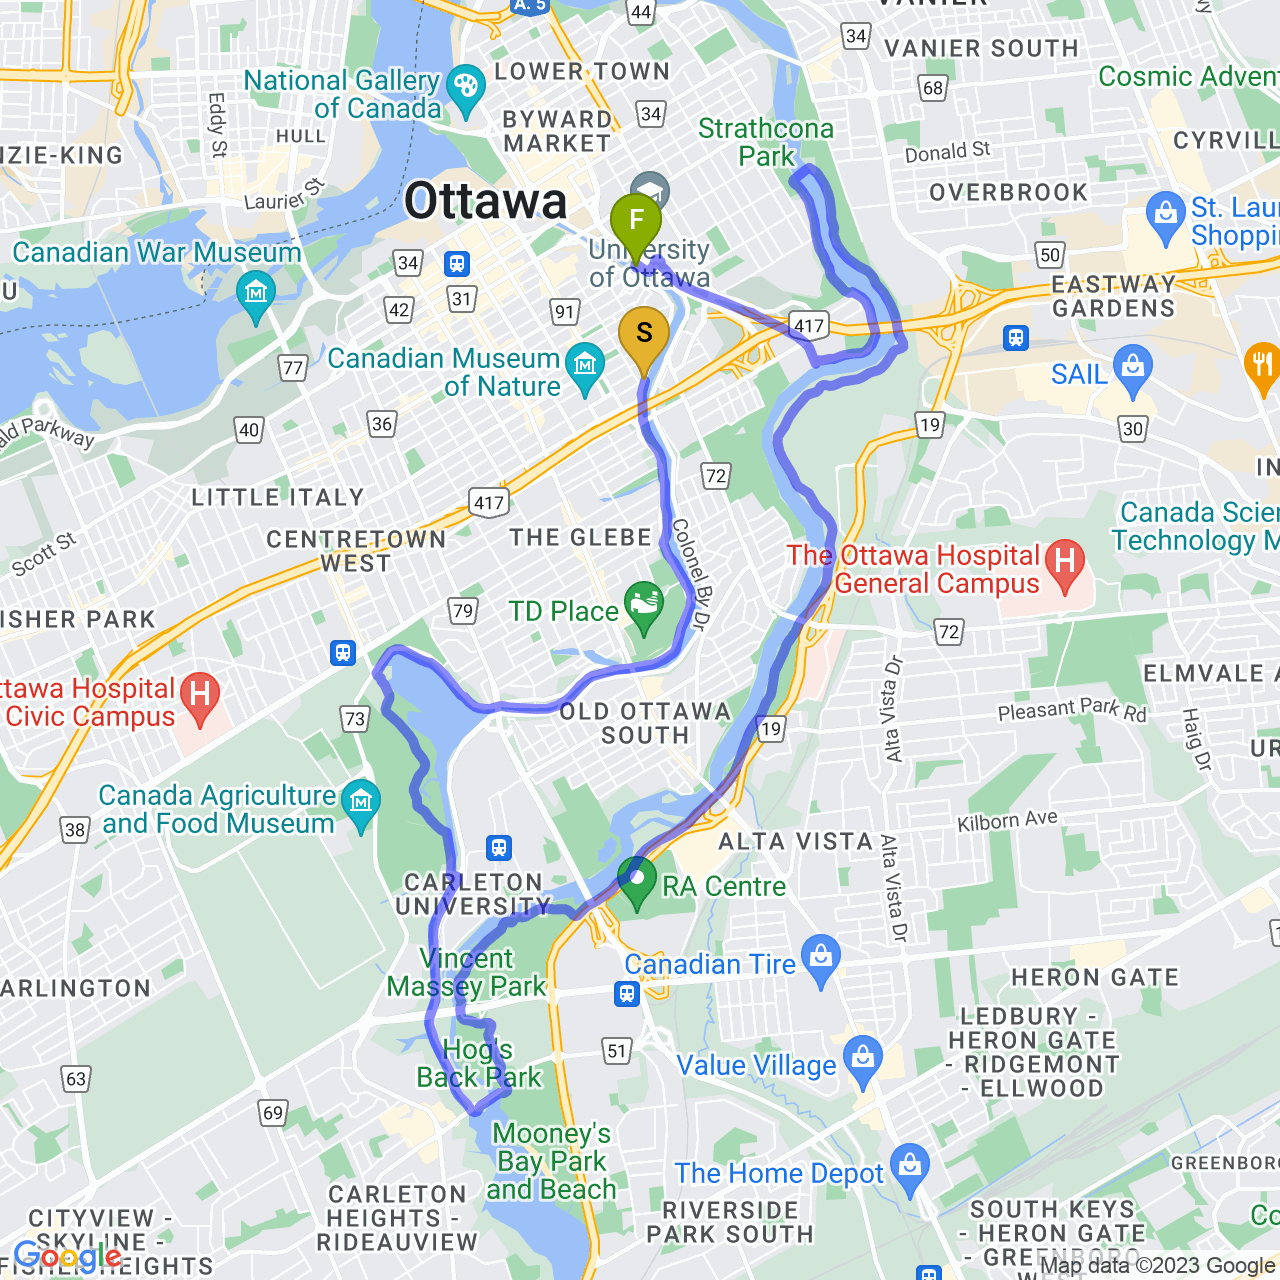 map of cool down ride